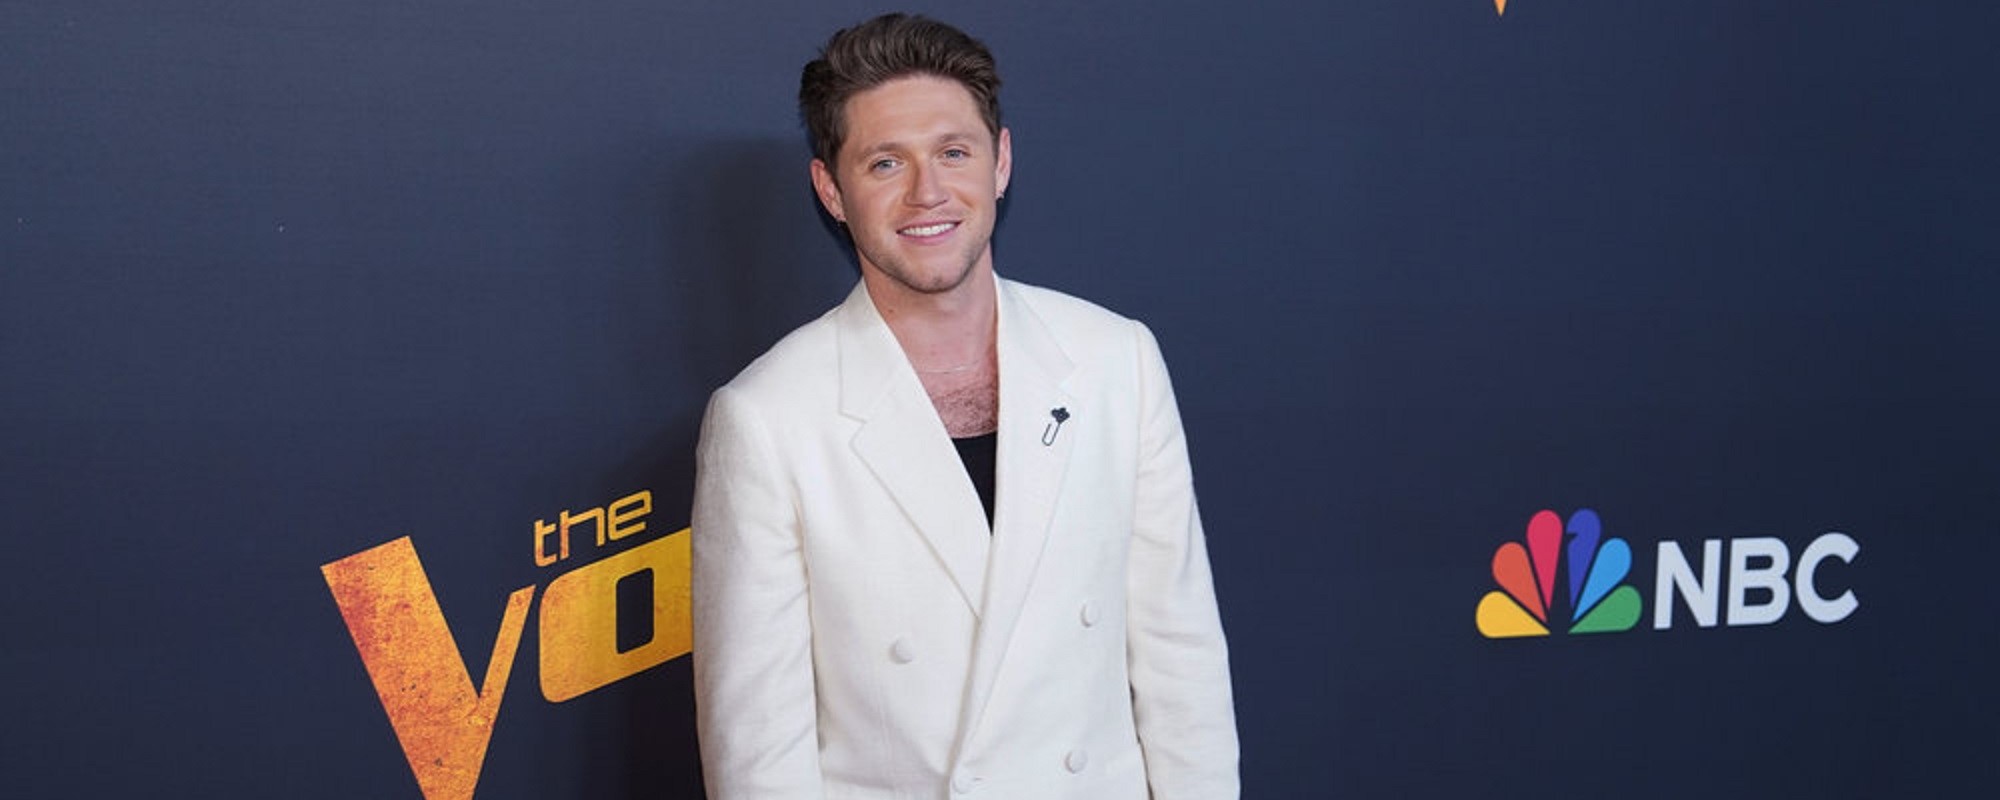 ‘The Voice’ Fans Livid Over Niall Horan’s Exit, Coaching Changes for Season 25